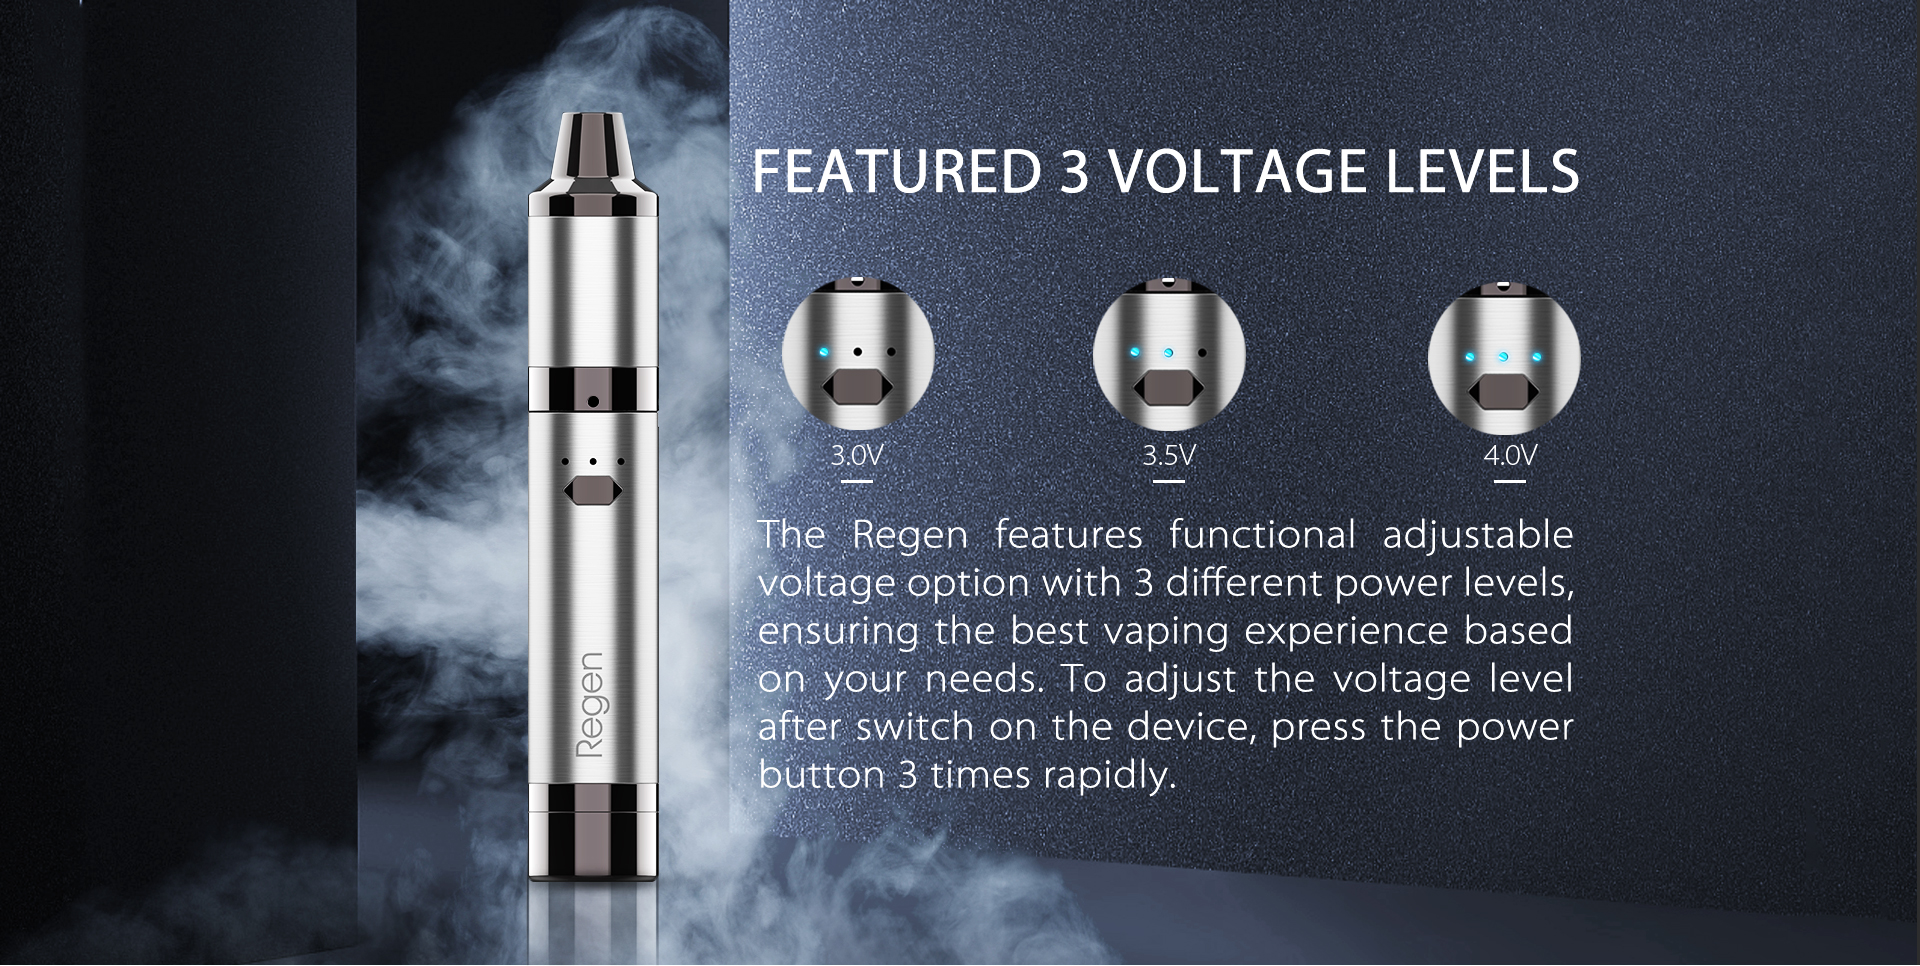 The Yocan Regen vaporizer pen features functional adjustable voltage option with 3 different power levels.